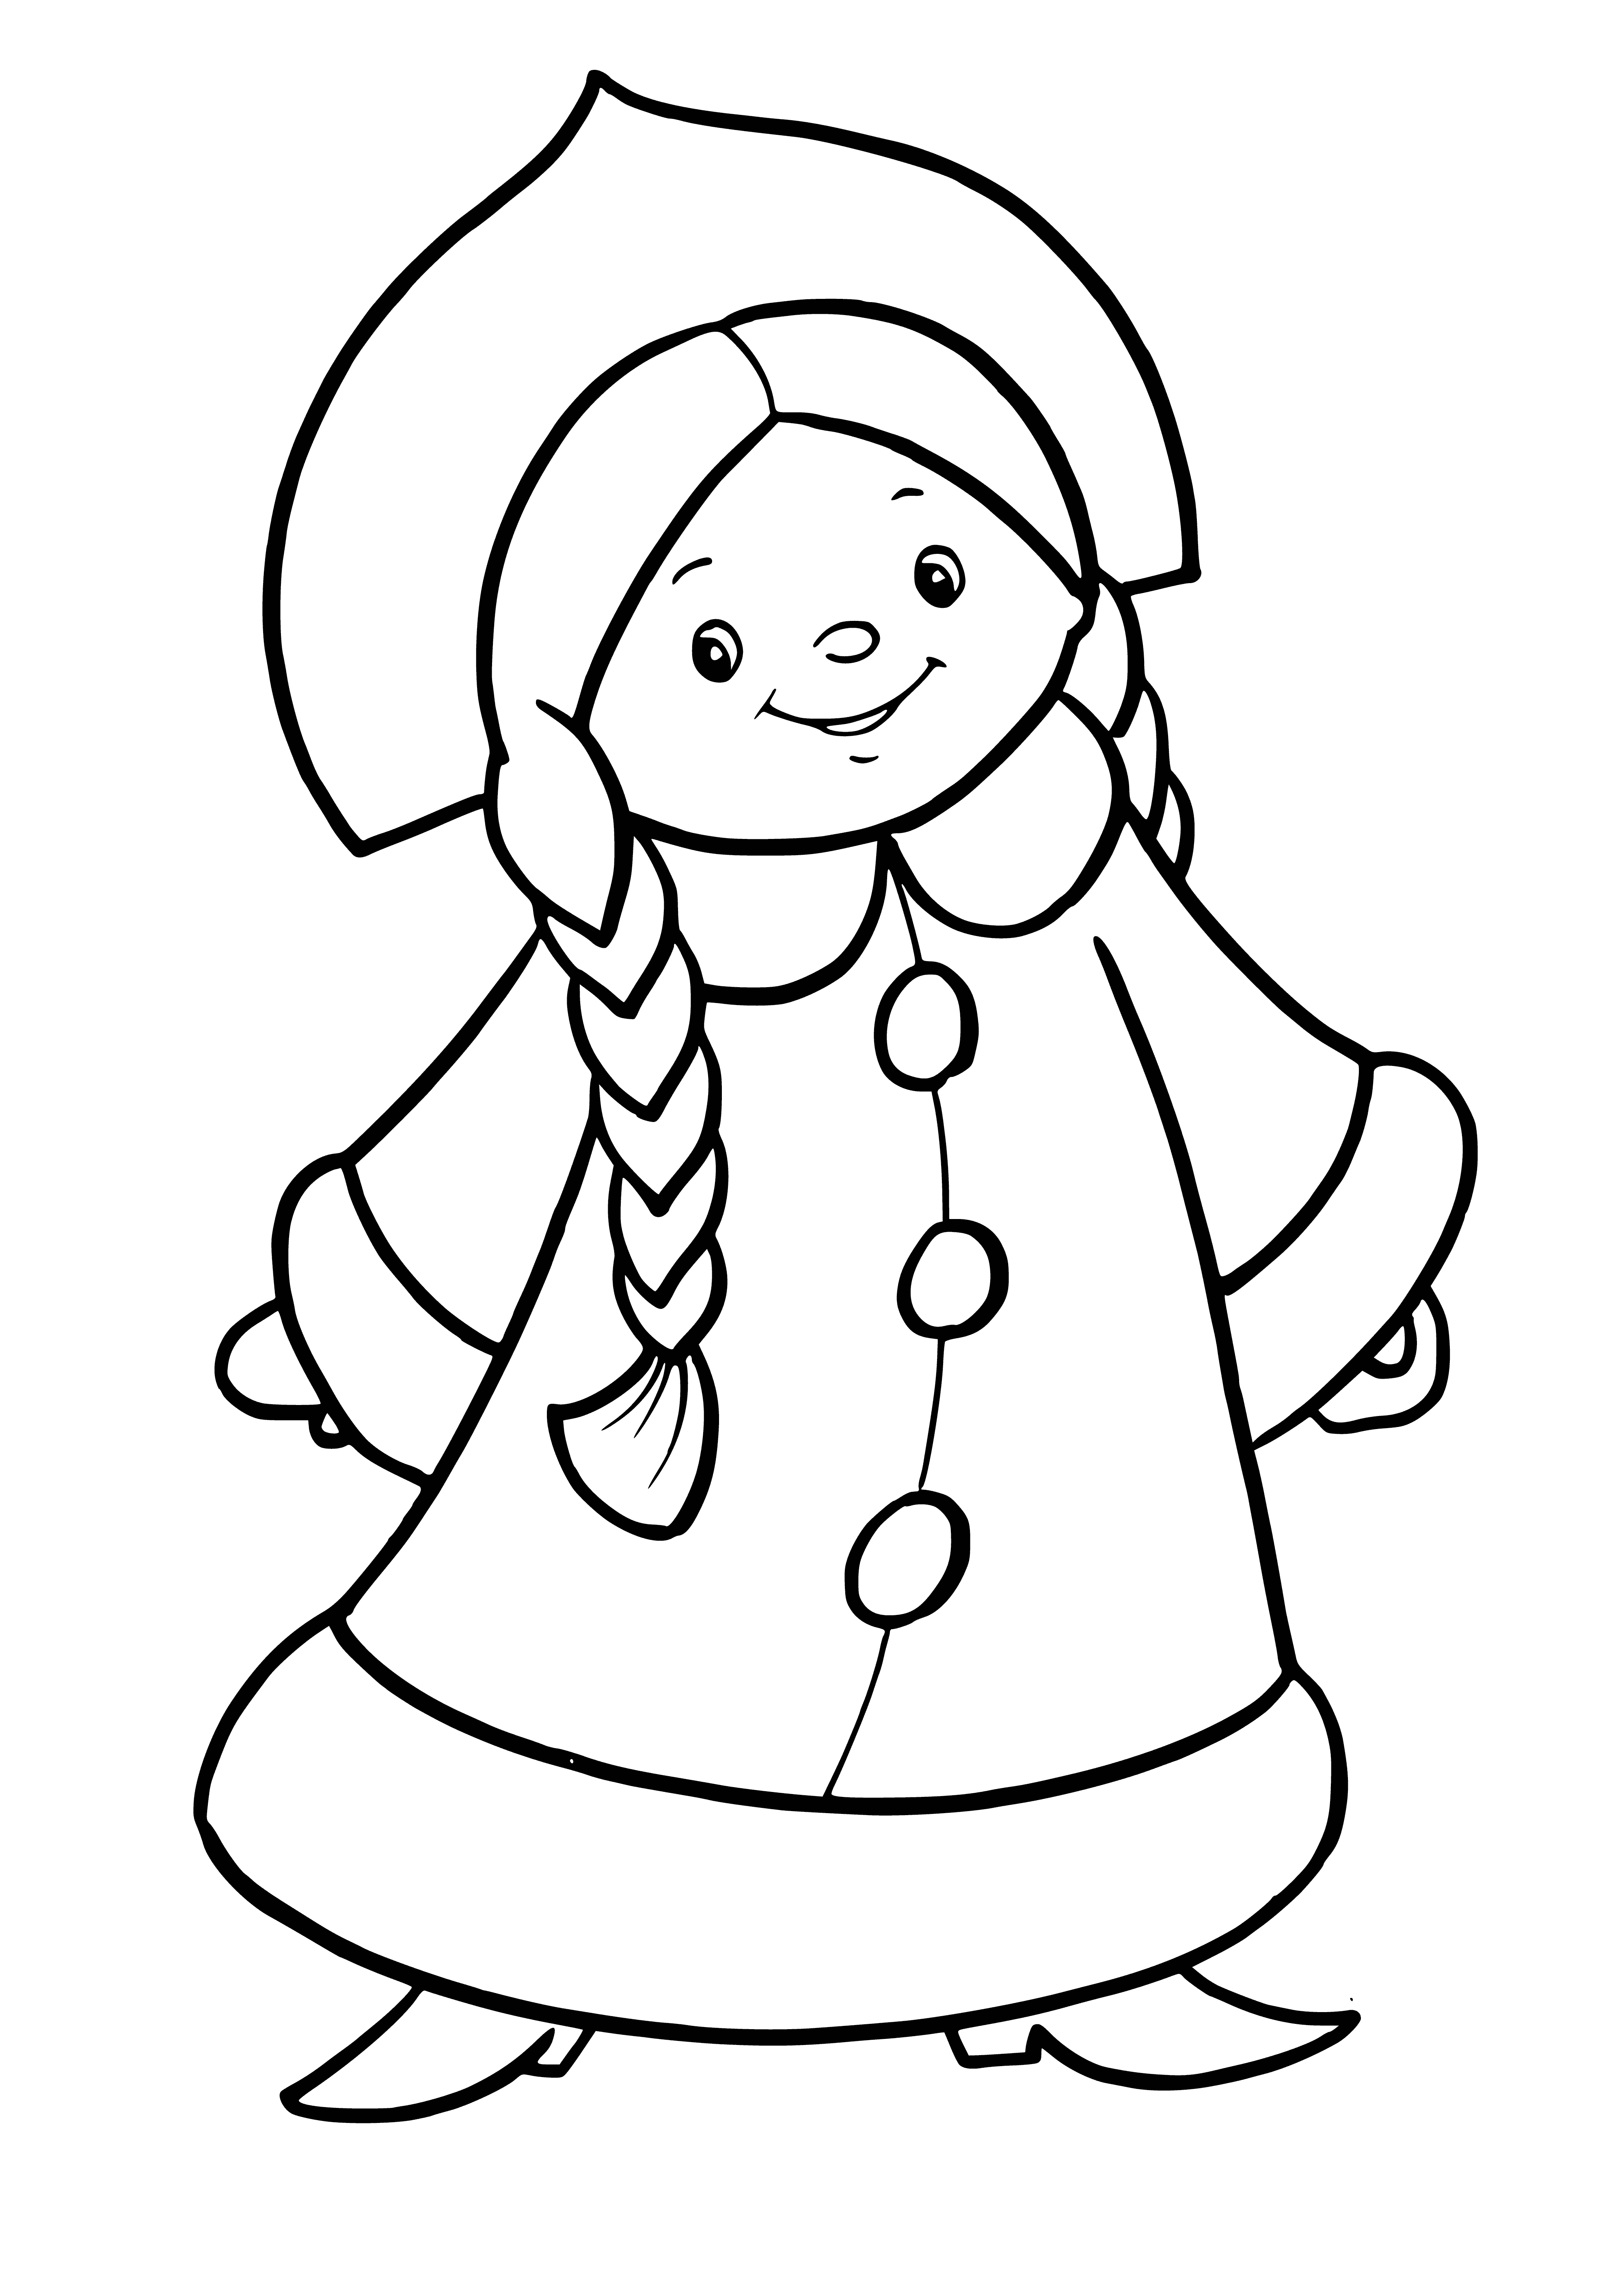 coloring page: Snow Maiden wears white fur-trimmed dress, evergreen wreath, holds broom and scarf.